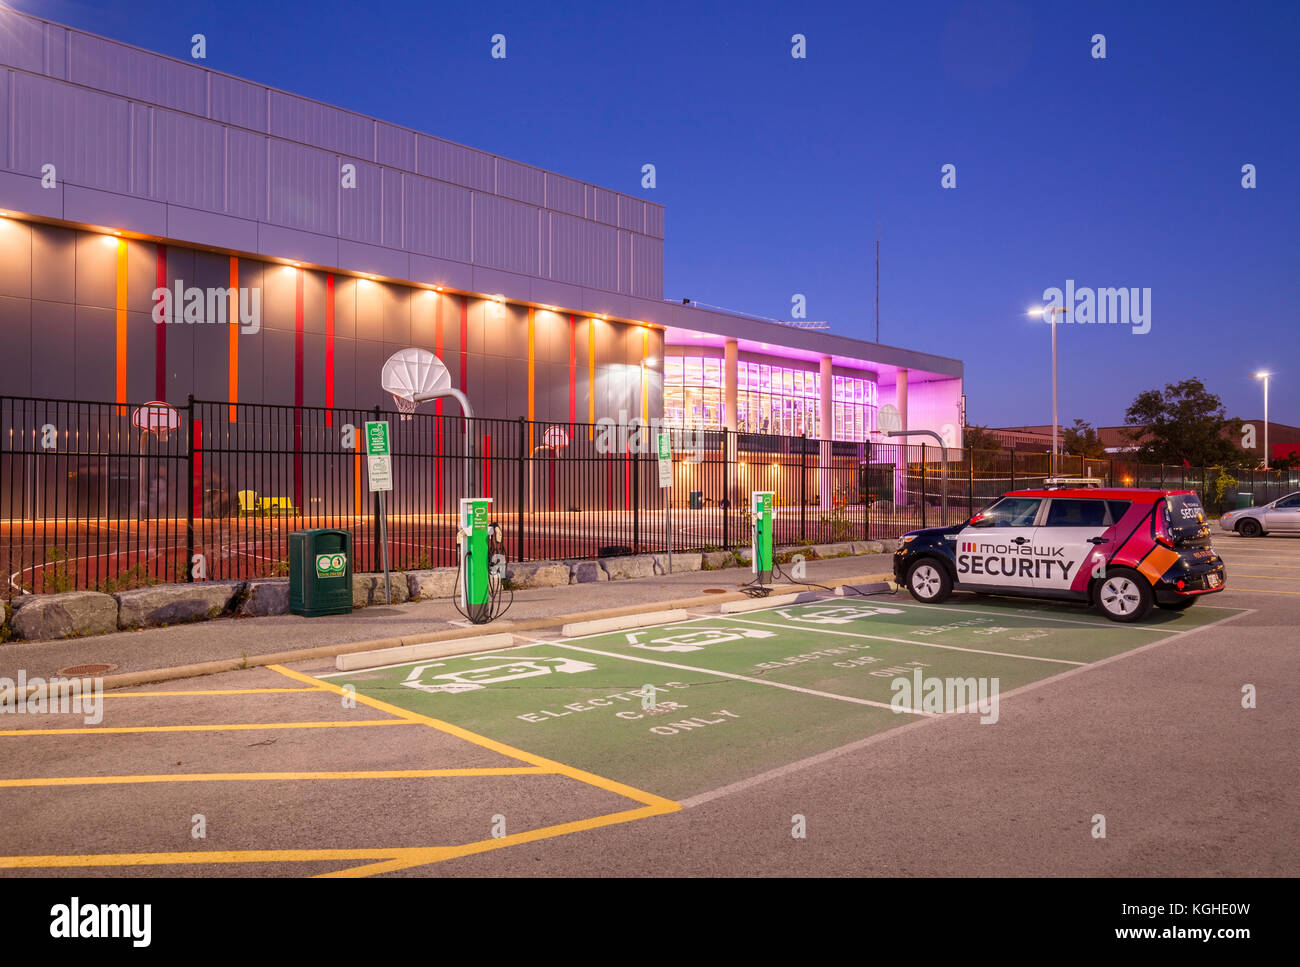 Electric vehicle parking spots, charging stations and an EV Mohawk Campus Security car in front of Mohawk College's Fennel Campus in Hamilton, Ontario Stock Photo